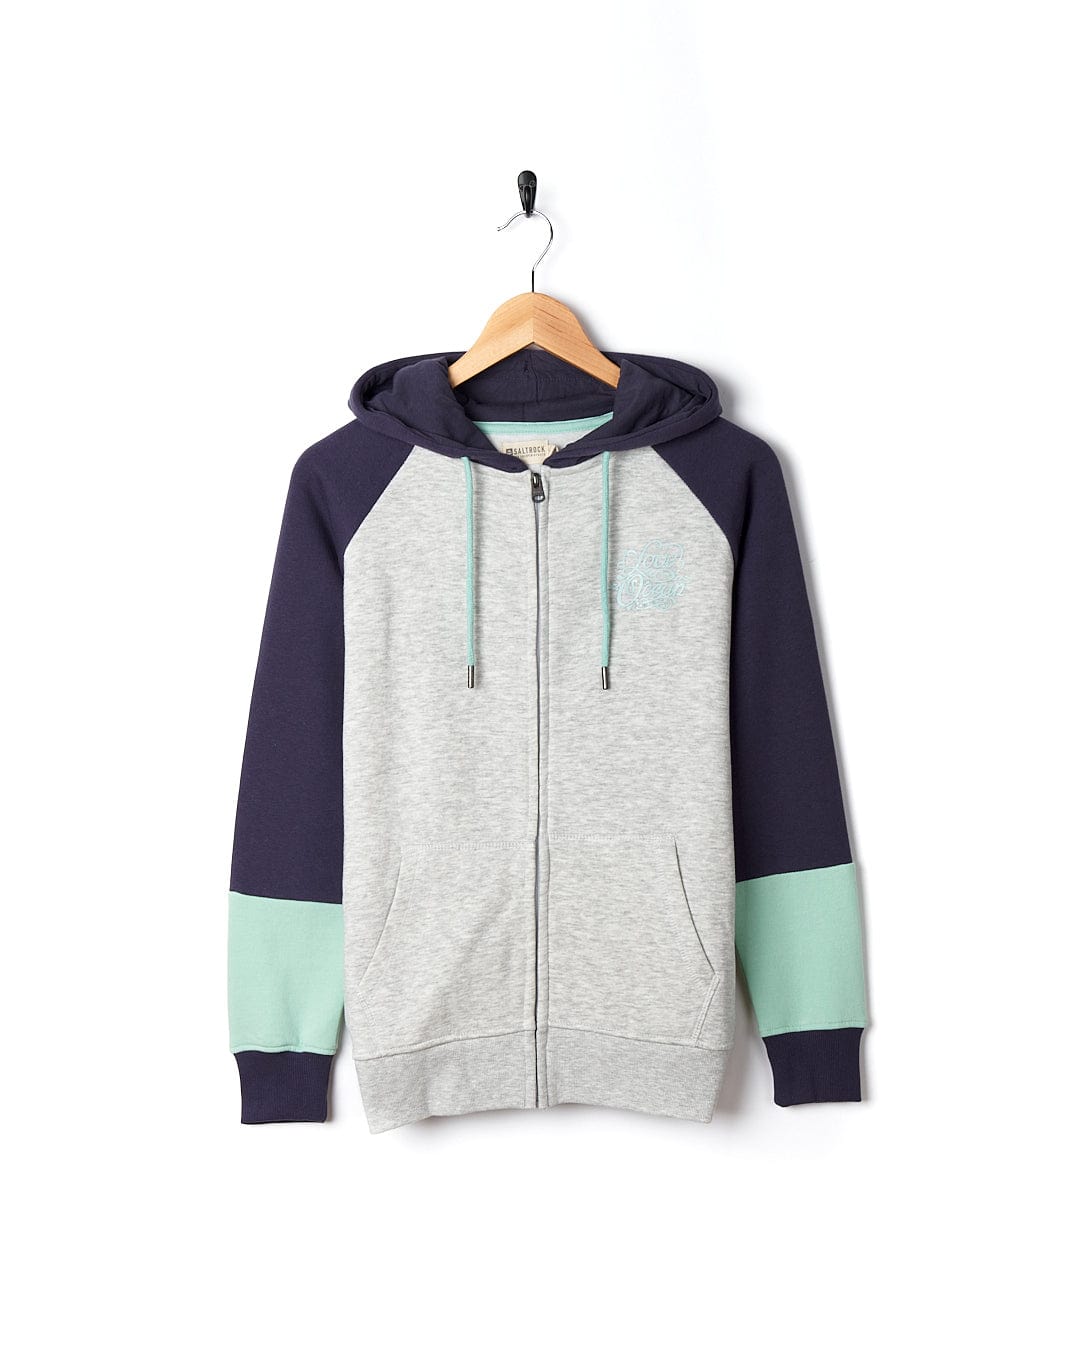 A Jan - Womens Zip Hoodie in Light Grey by Saltrock with blue and green accents.